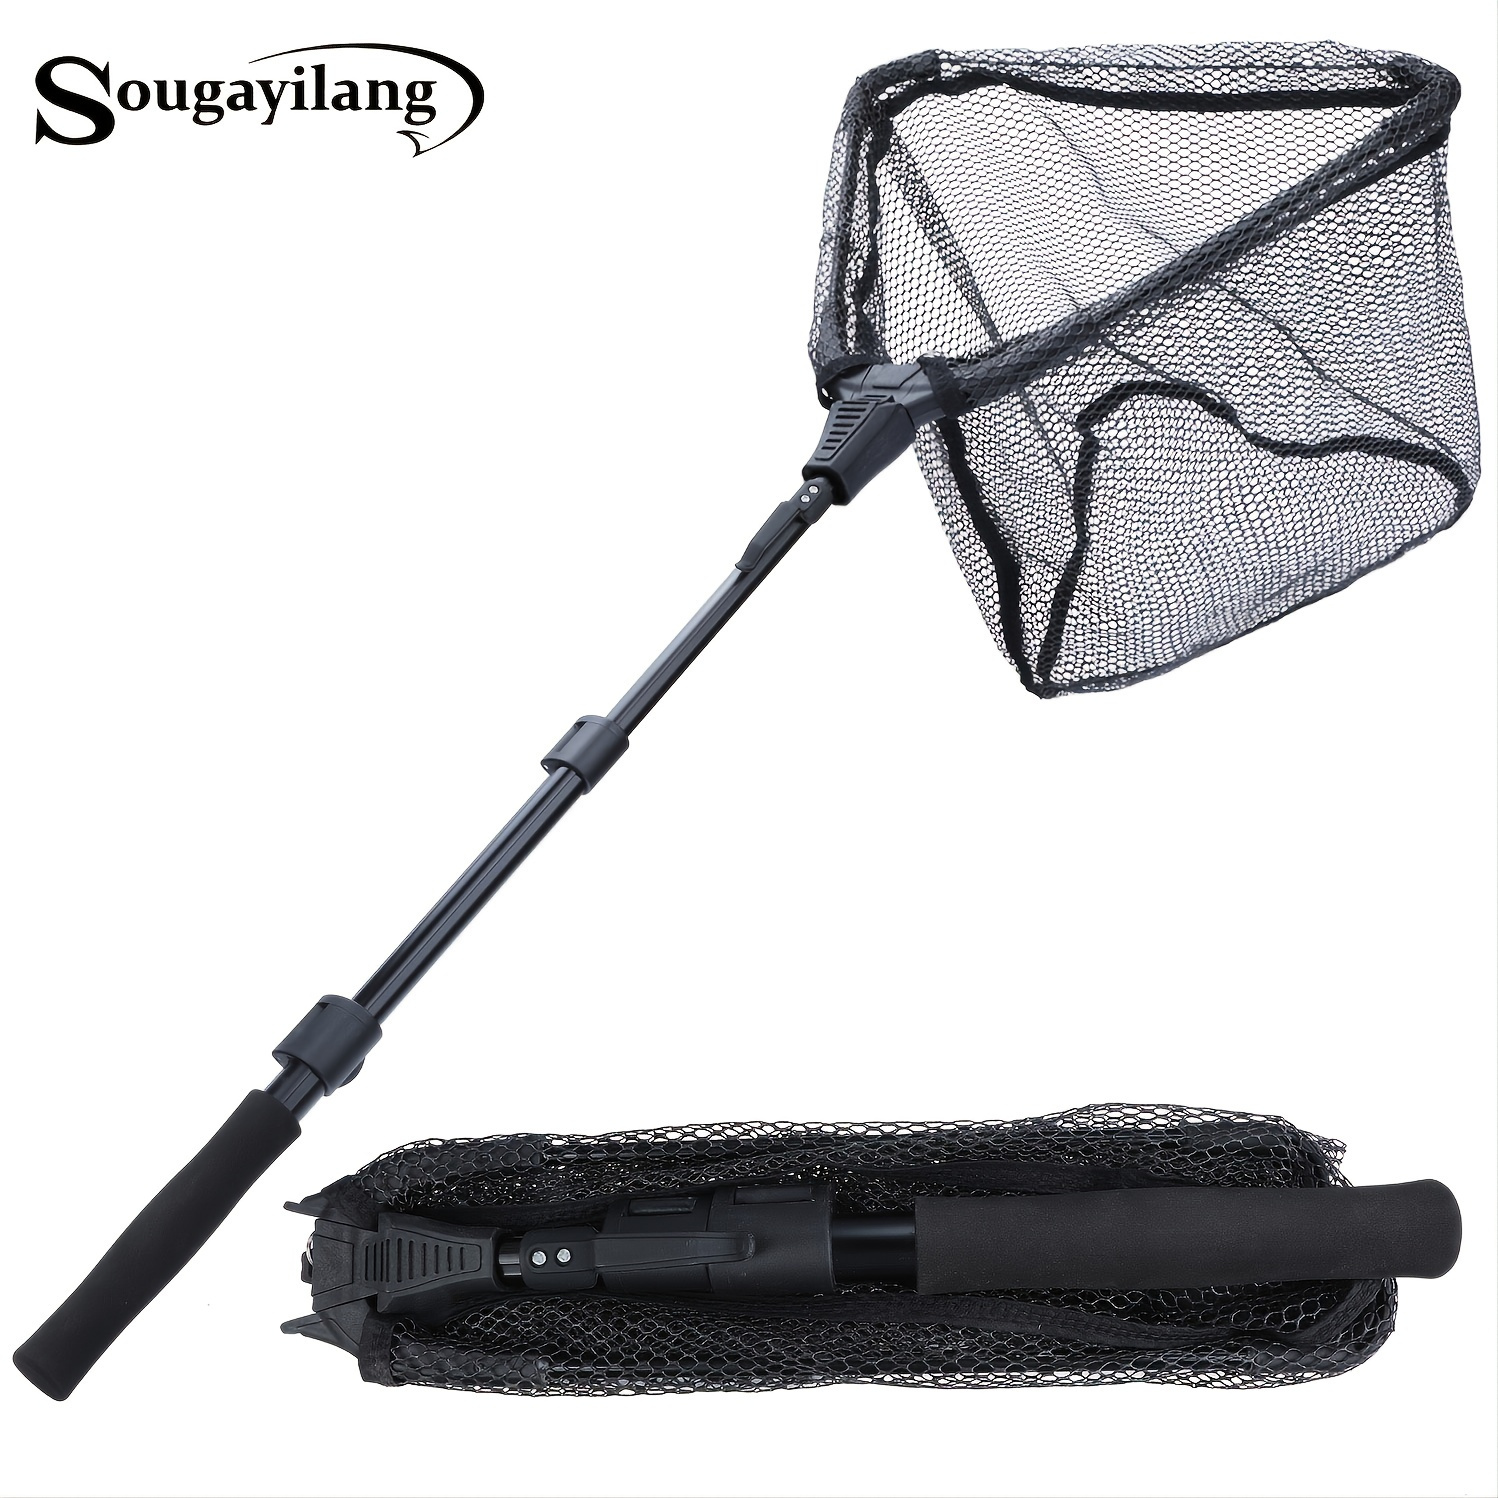 

Sougayilang Foldable Fishing Net With Telescopic Pole And Eva Handle - Durable Nylon Mesh For Safe Fish Catching And Release